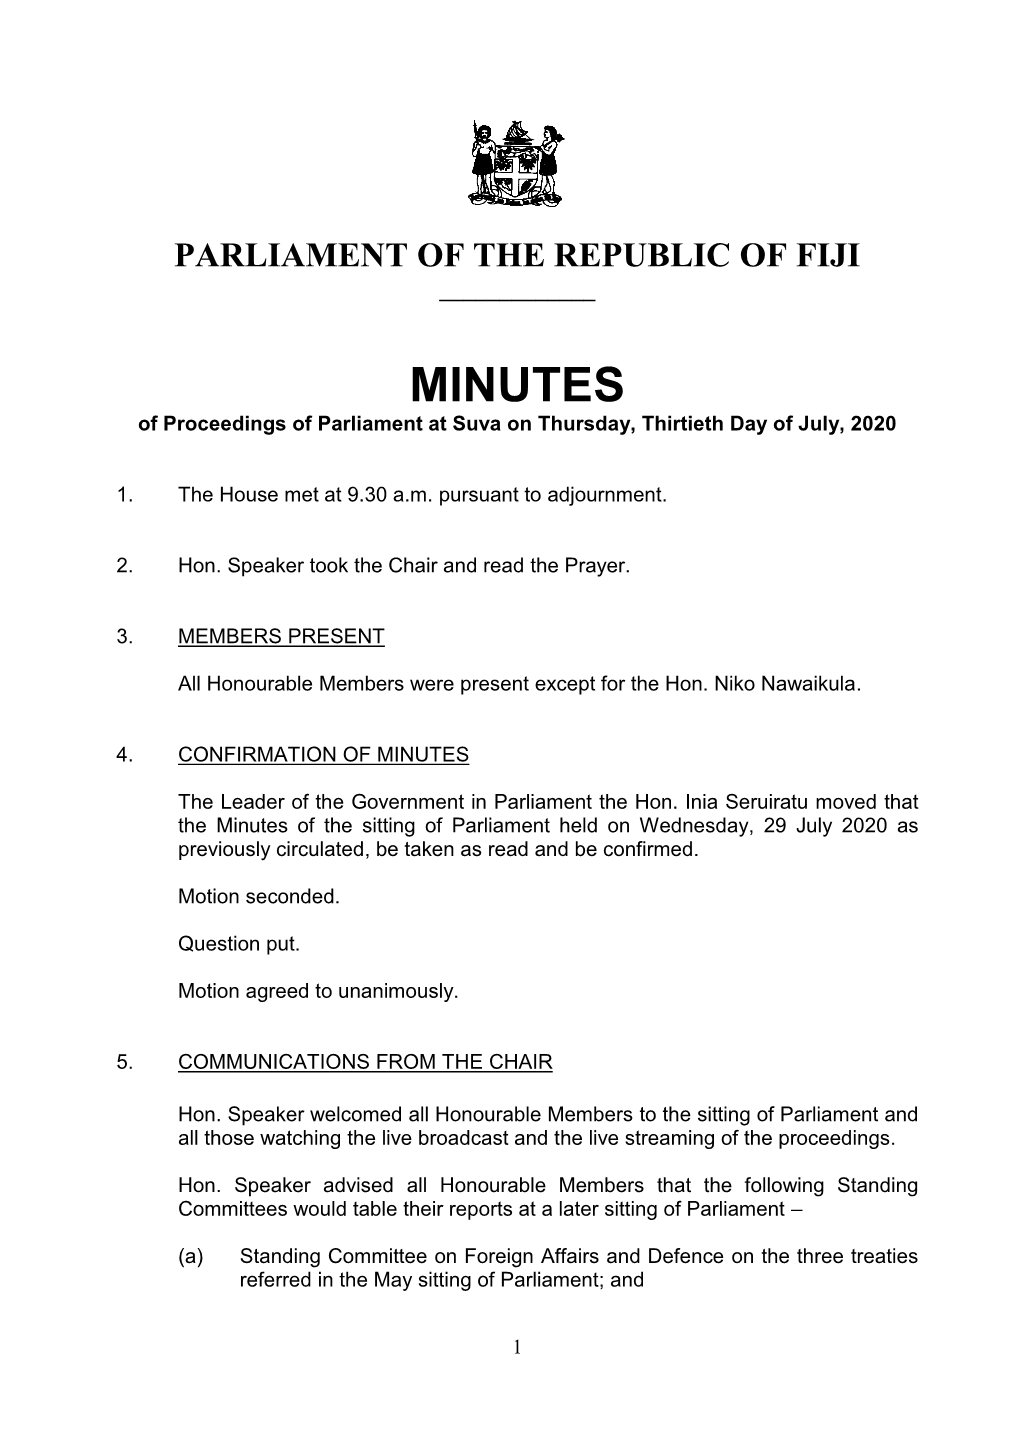 MINUTES of Proceedings of Parliament at Suva on Thursday, Thirtieth Day of July, 2020